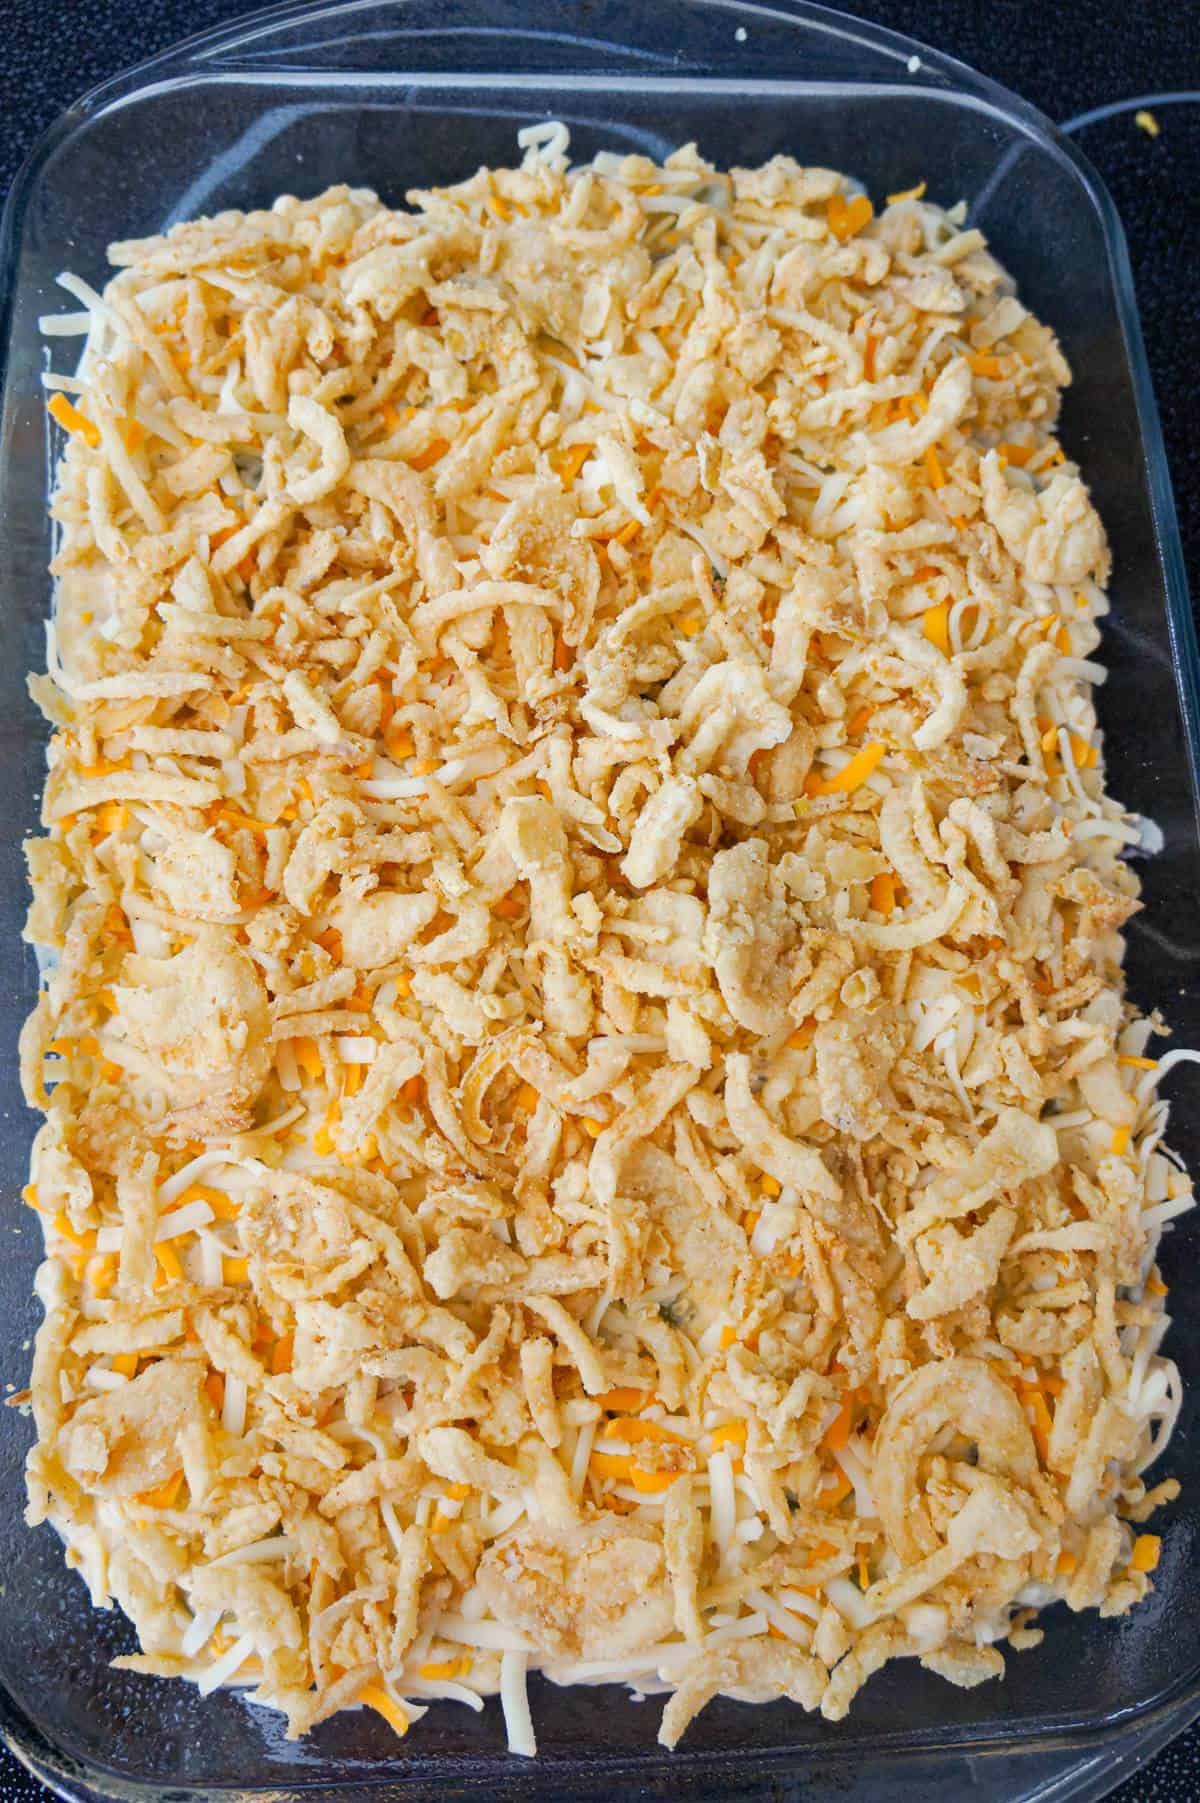 crispy fried onions on top of mac and cheese casserole with green beans